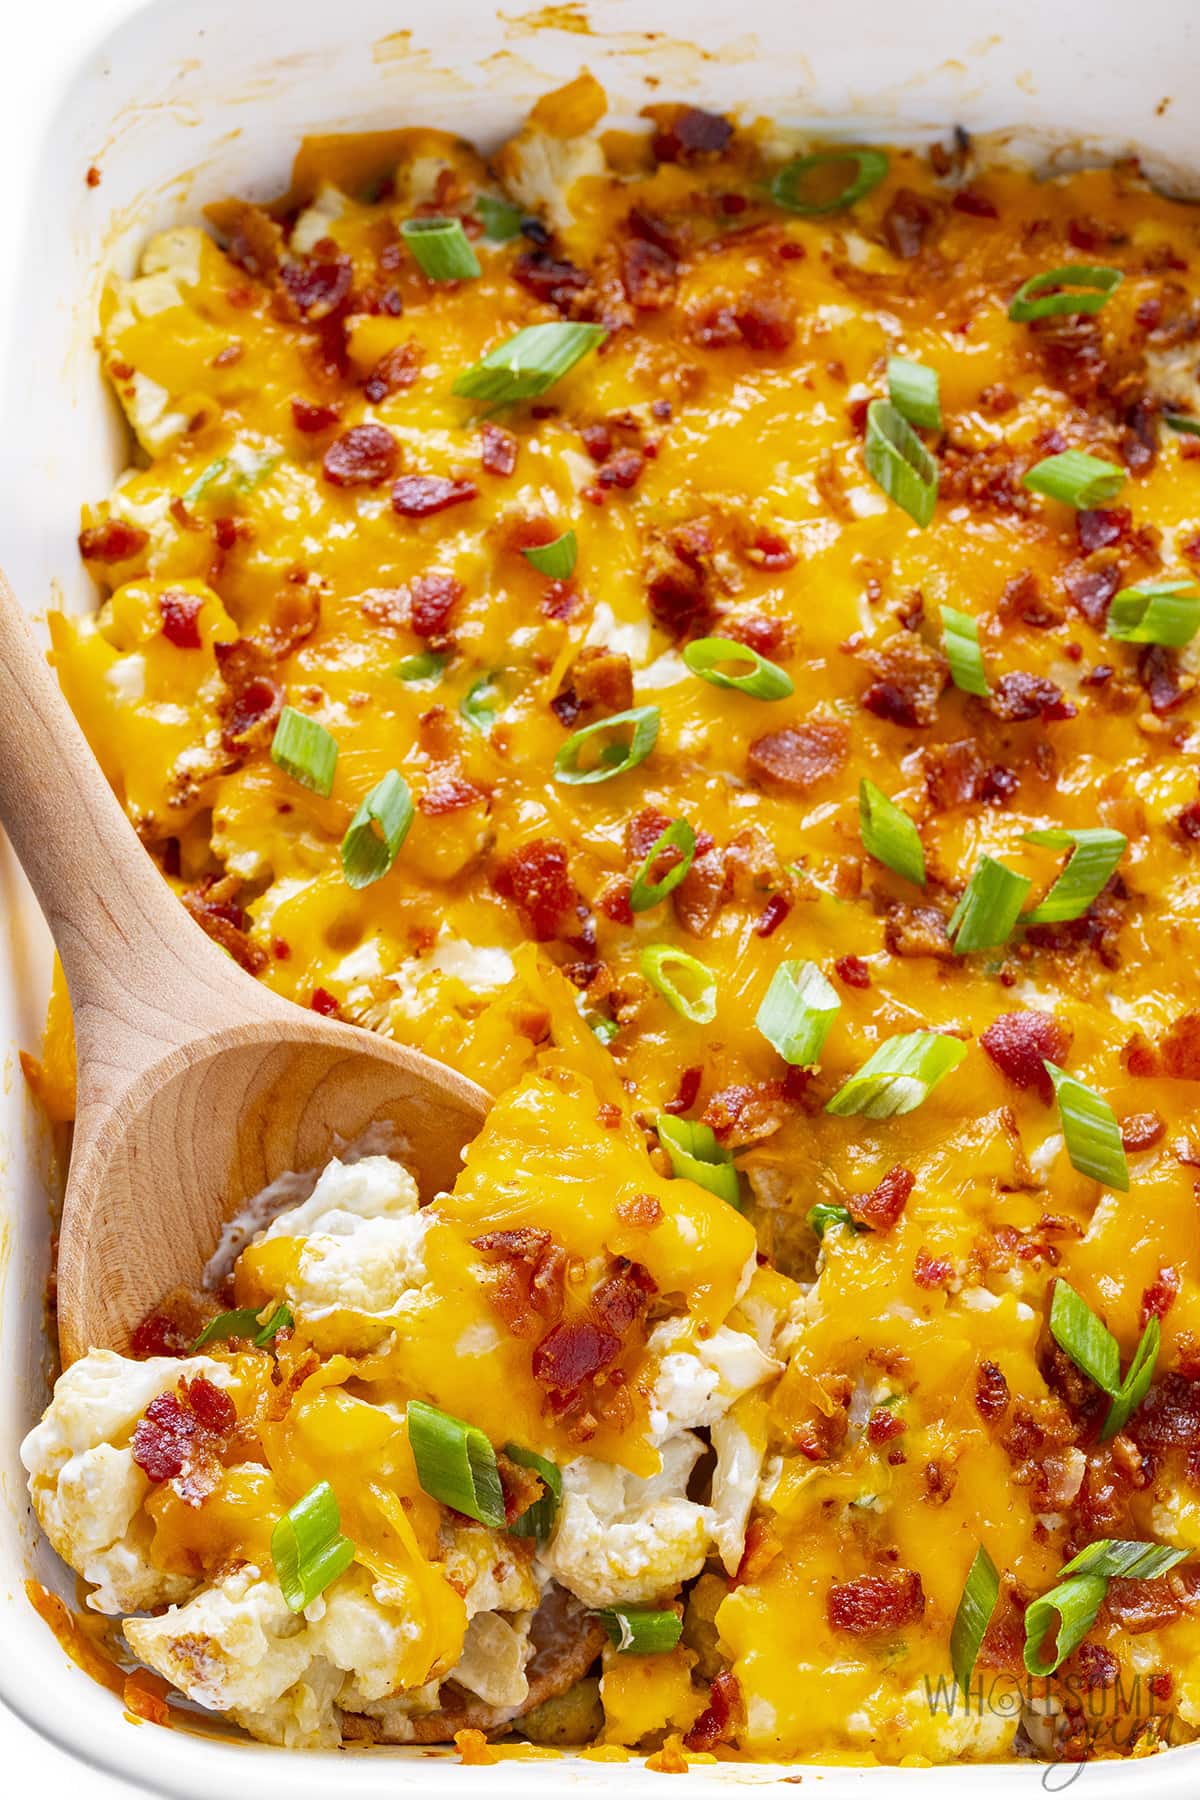 Loaded cauliflower casserole with serving spoon.